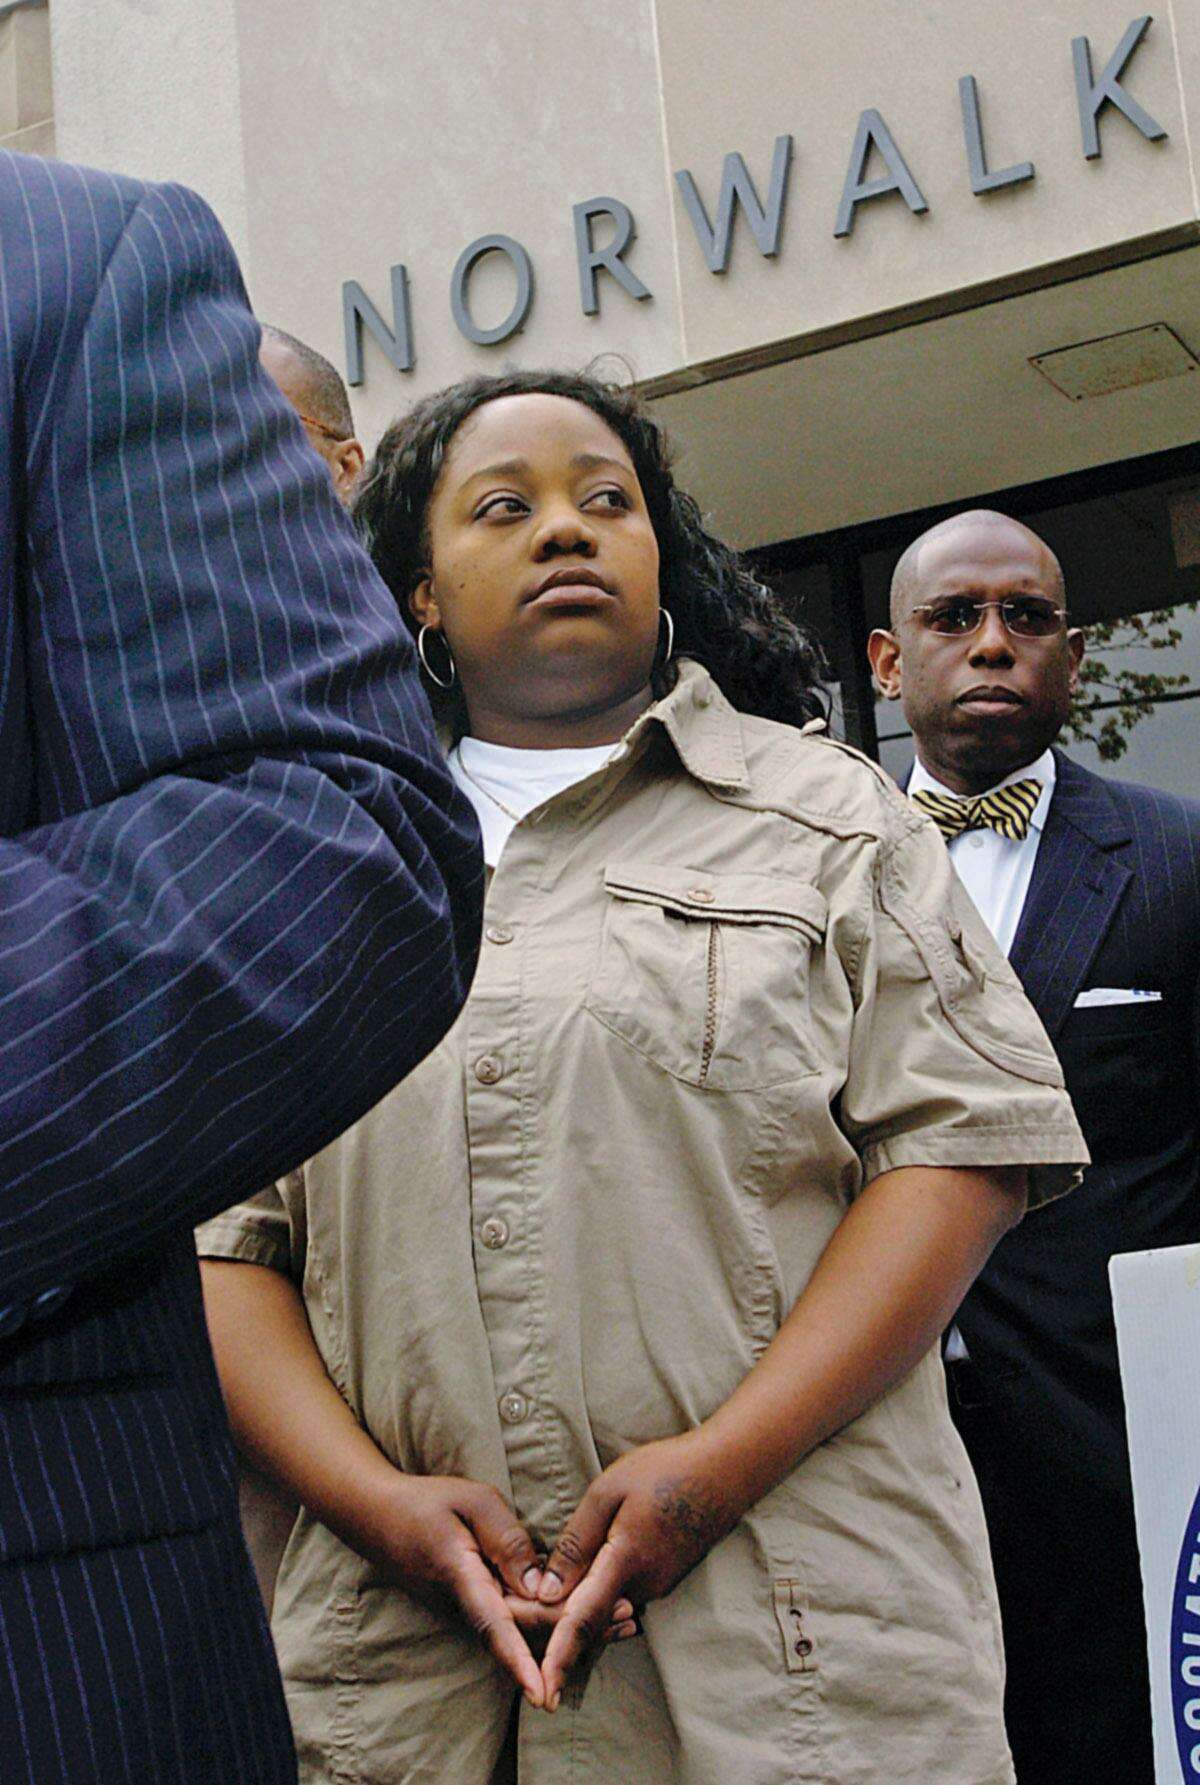 Tanya McDowell, who was arrested and charged with larceny and conspiracy to commit larceny for allegedly stealing $15,686 from Norwalk schools after she enrolled her son in a city elementary school, attends a press conference outside Norwalk Superior Court Wednesday, April 27, 2011 in Norwalk.